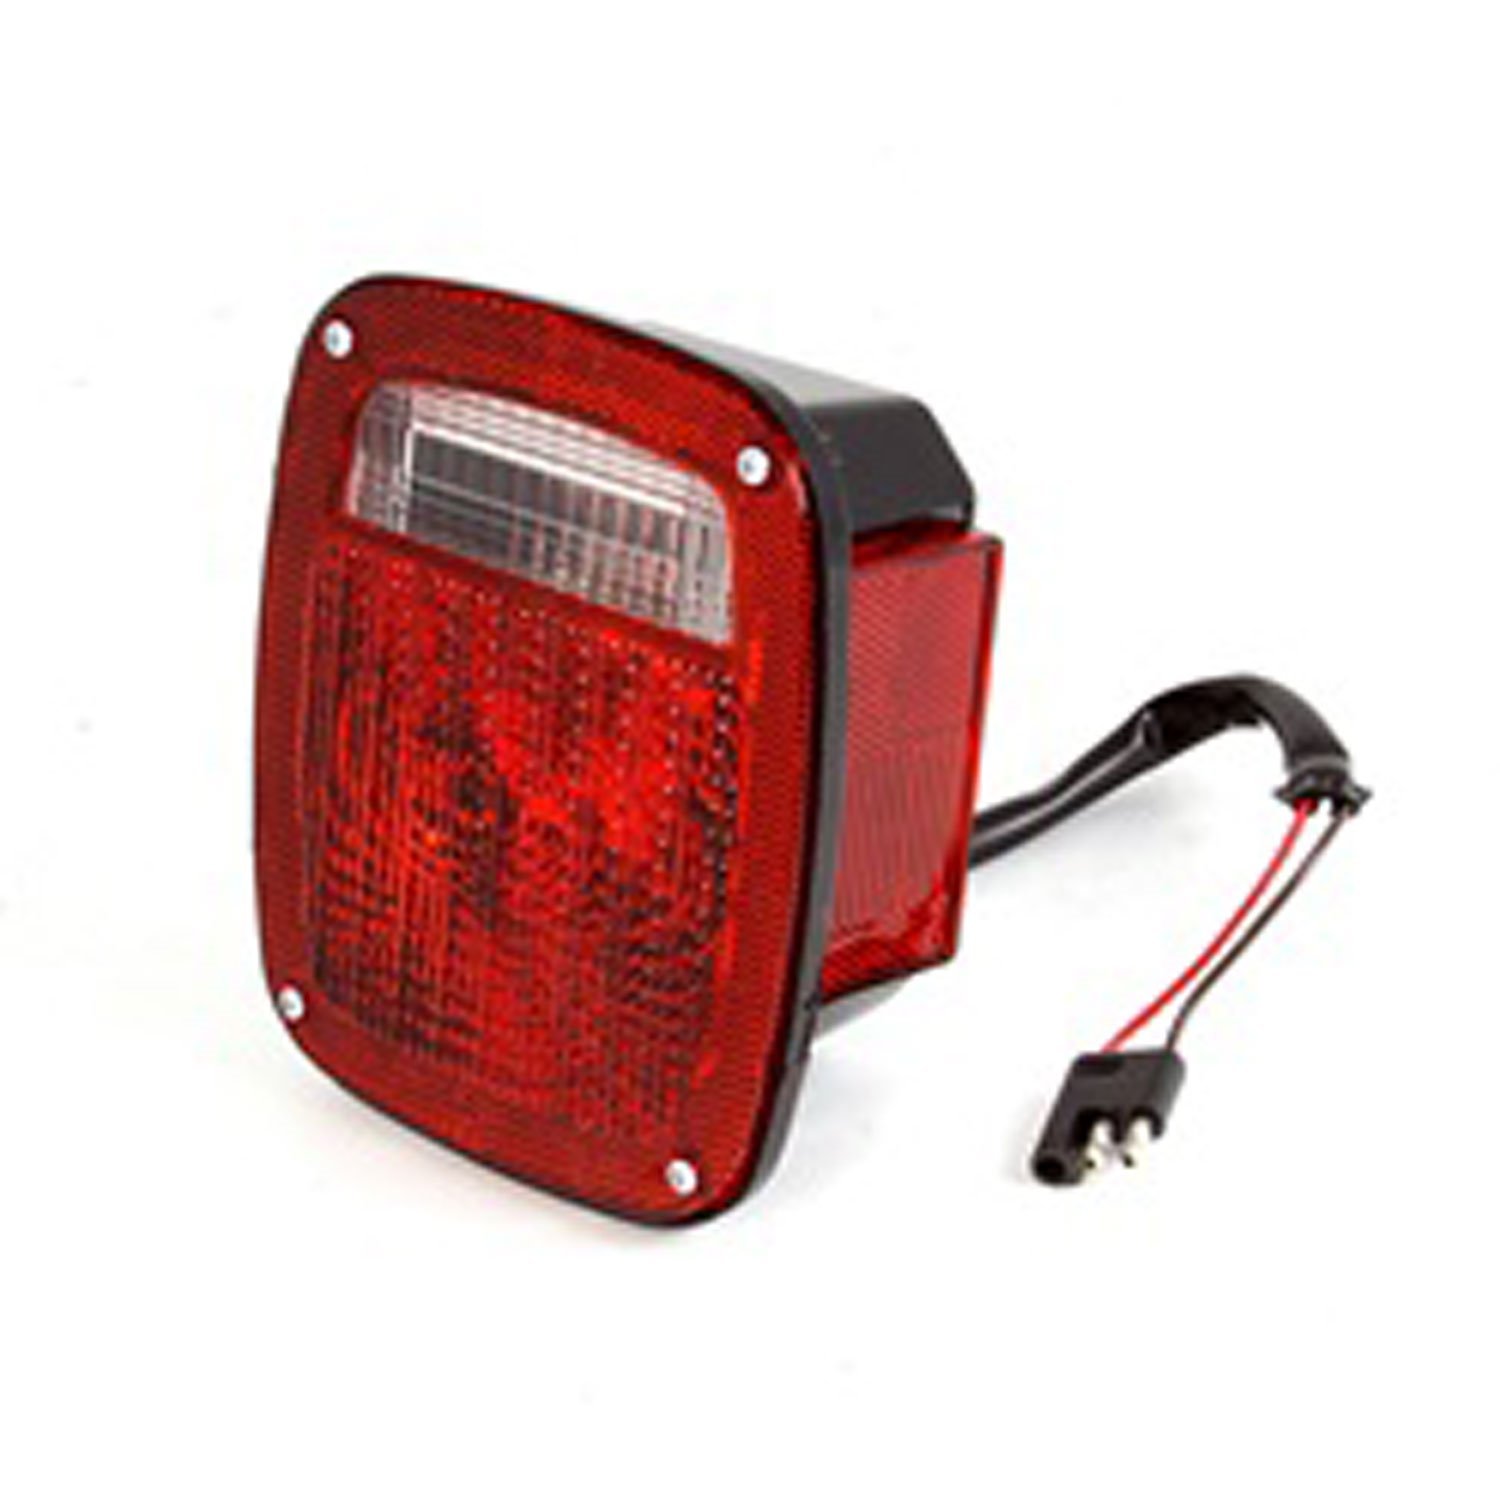 Replacement tail light assembly from Omix-ADA, Fits right side of 81-83 Jeep CJ5 81-86 CJ7 and 81-86 CJ8